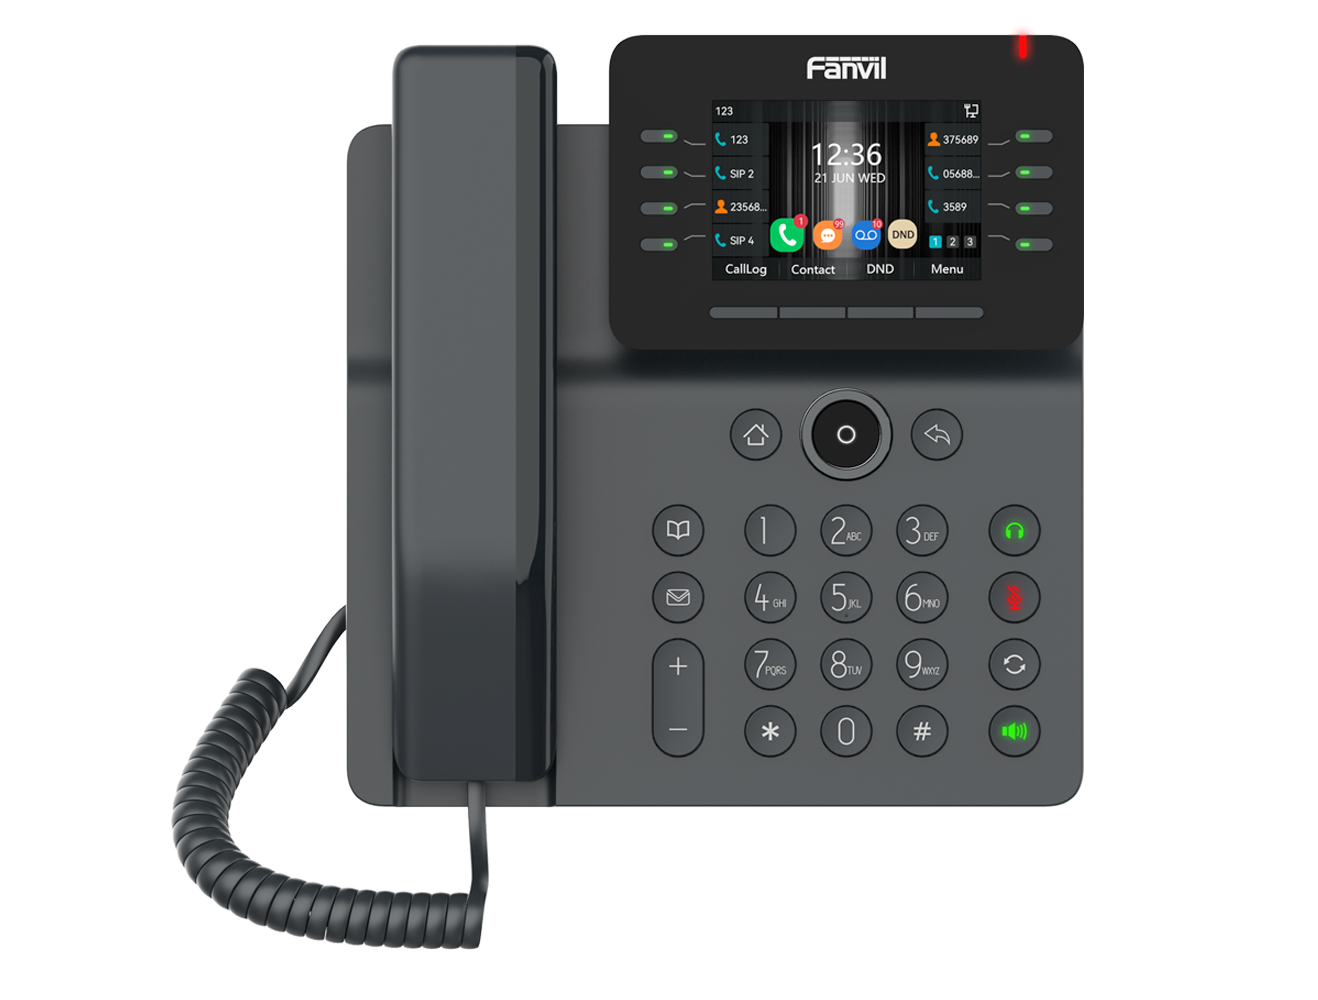 Is there an external power supply available for the Fanvil V64 phone?